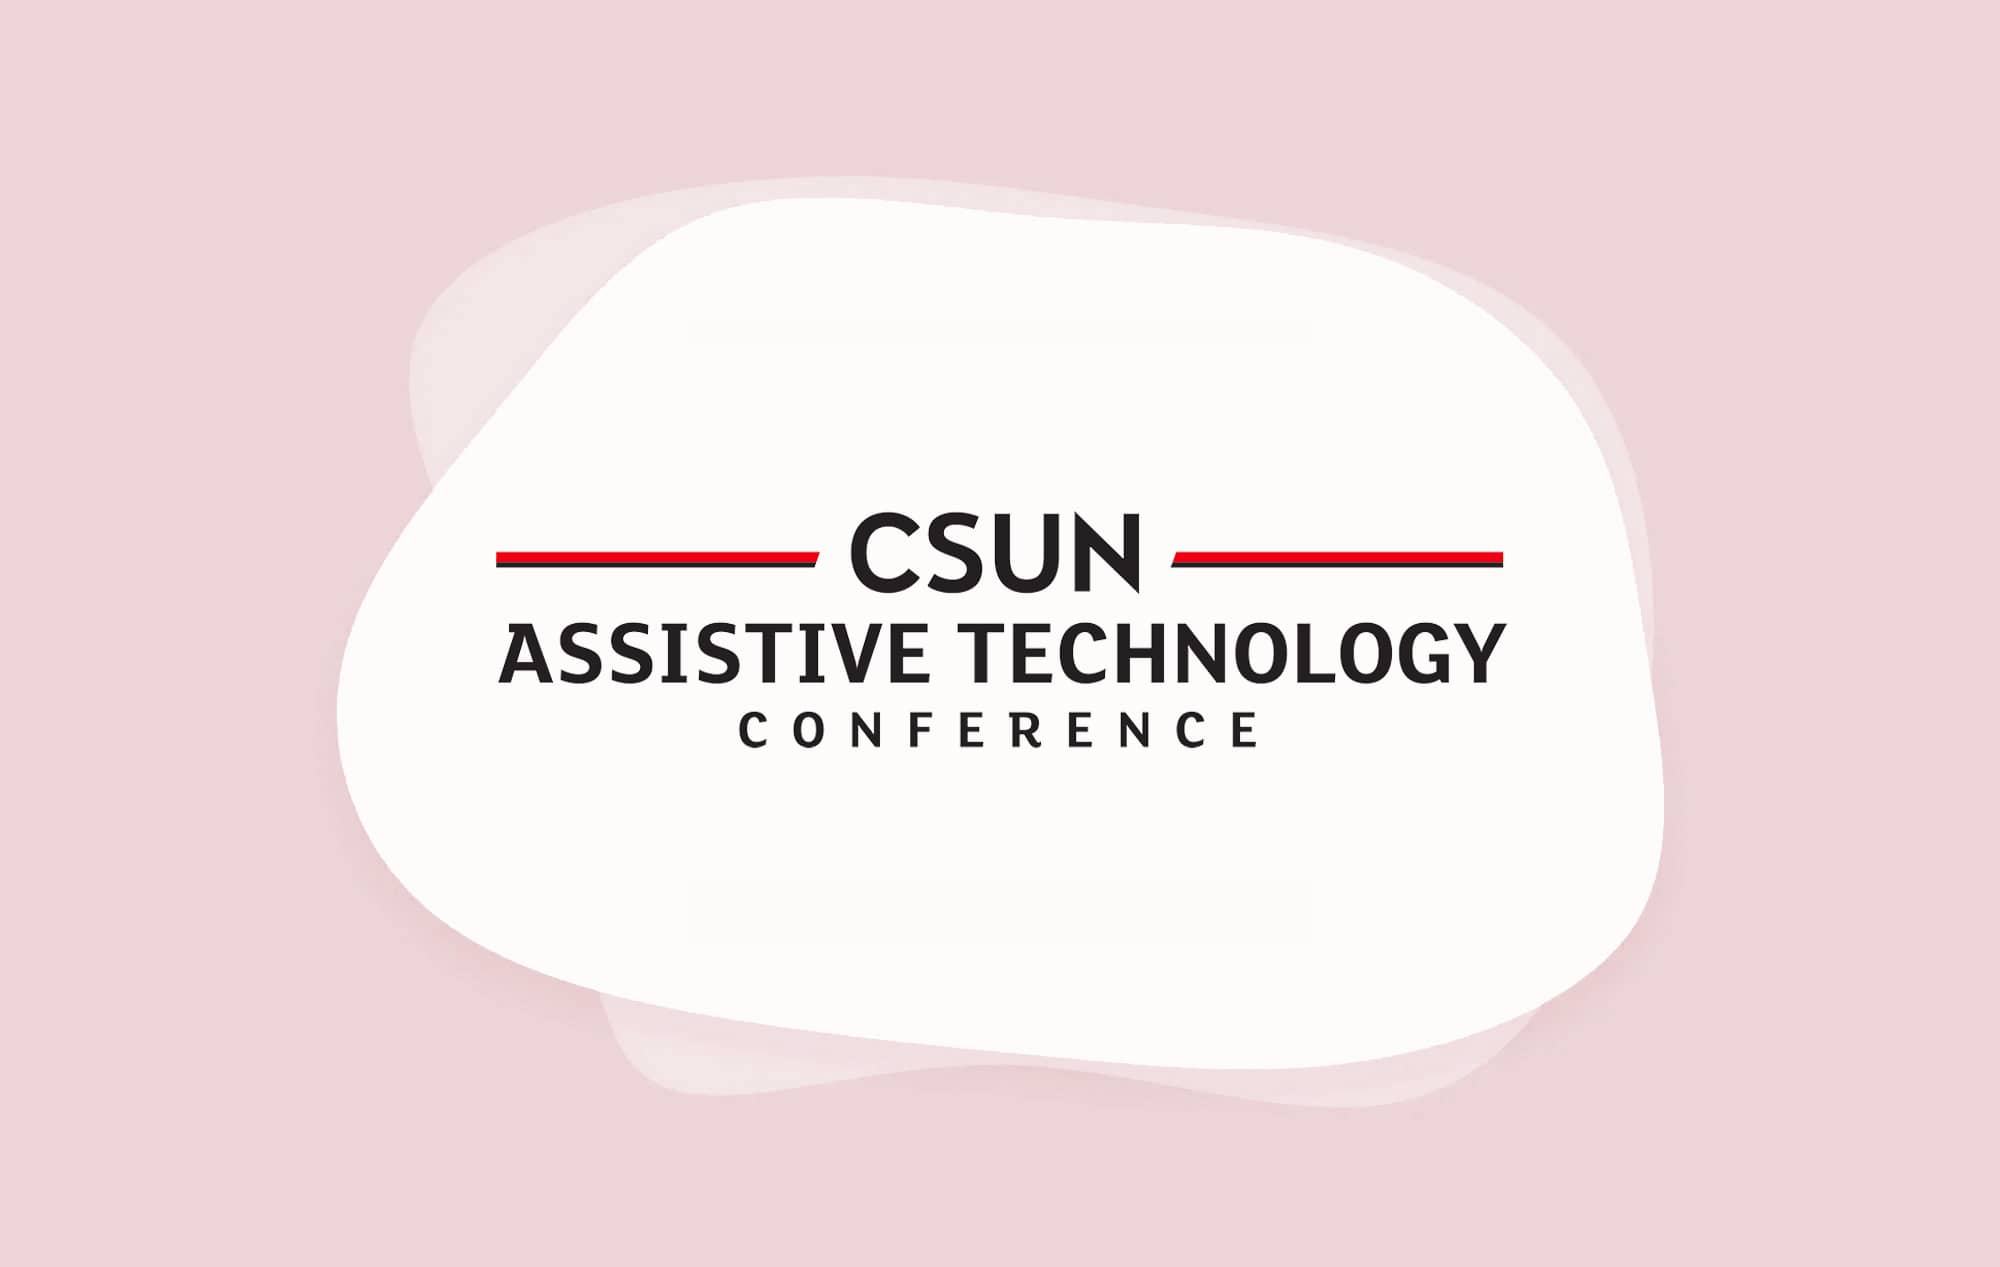 CSUN Assistive Technology Conference logo on faded red background.